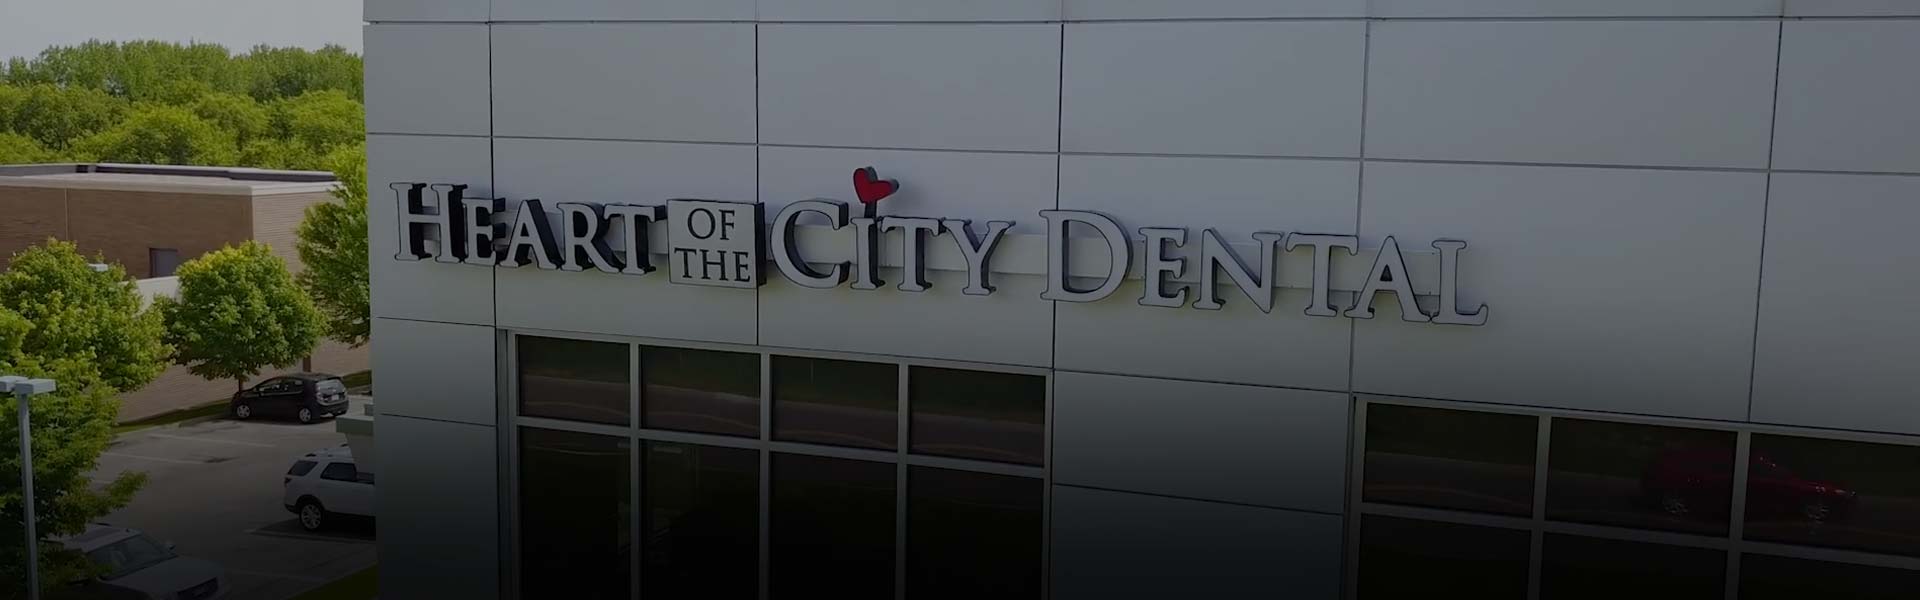 Heart of the city Dental Building